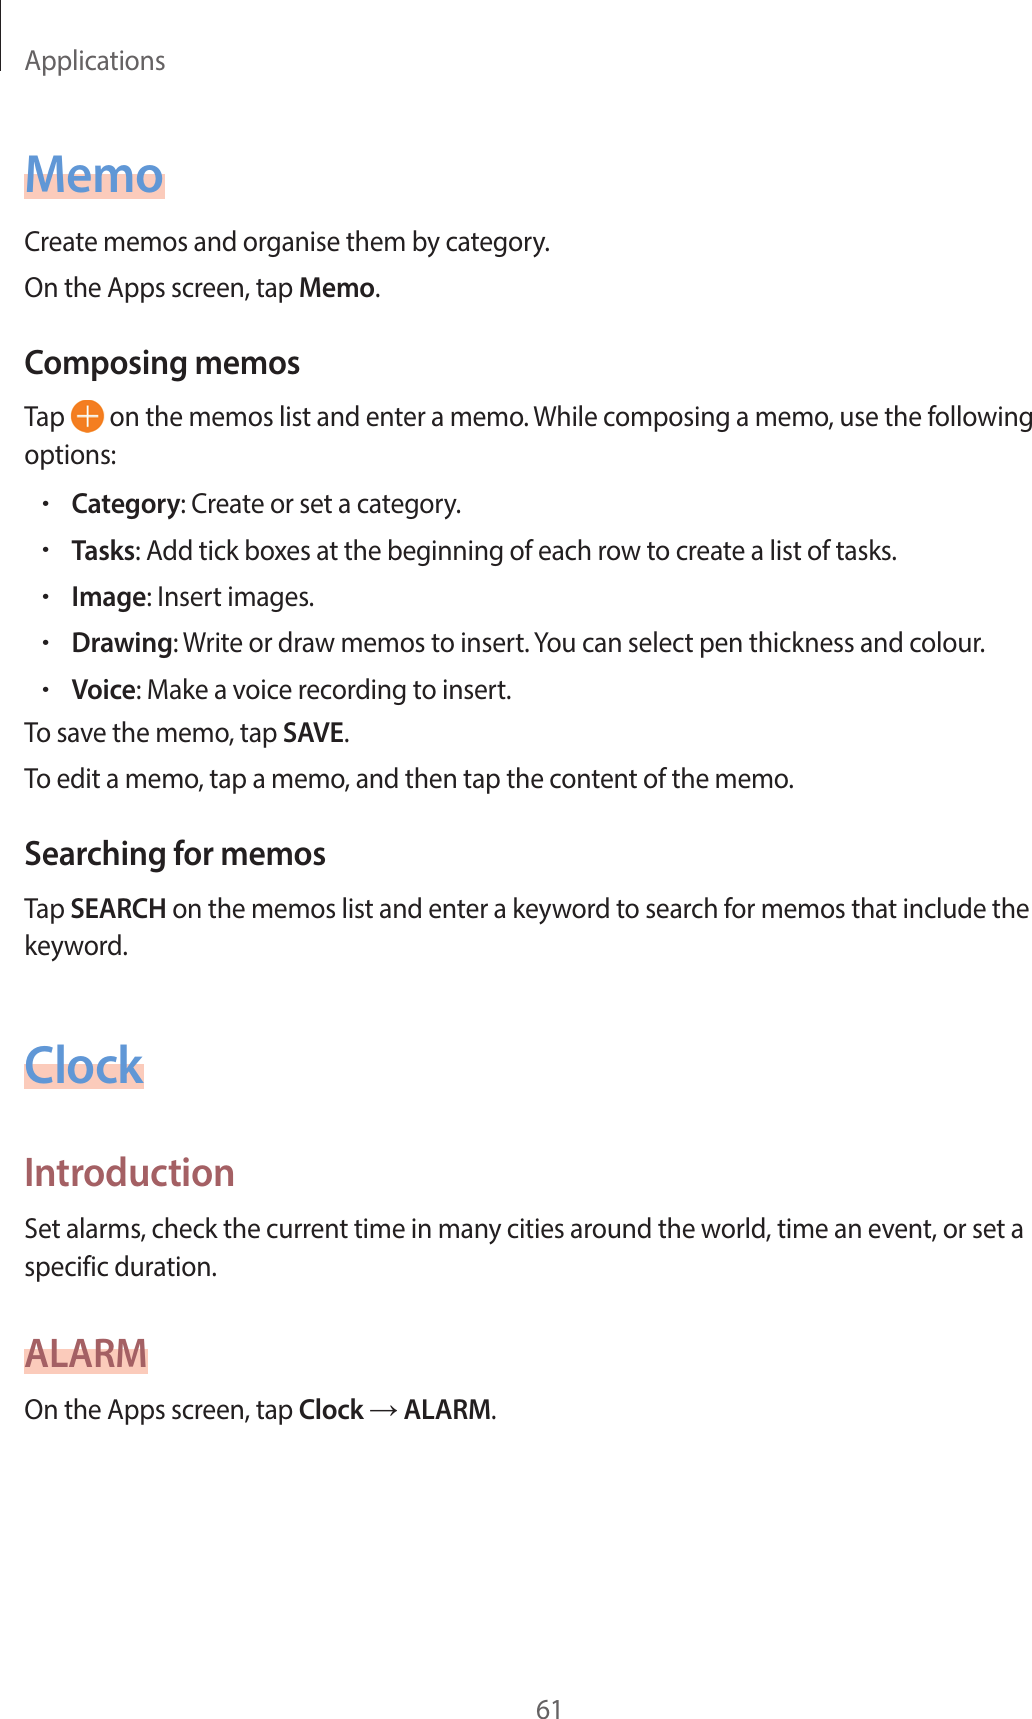 Applications61MemoCreate memos and organise them by category.On the Apps screen, tap Memo.Composing memosTap   on the memos list and enter a memo. While composing a memo, use the following options:•Category: Create or set a category.•Tasks: Add tick boxes at the beginning of each row to create a list of tasks.•Image: Insert images.•Drawing: Write or draw memos to insert. You can select pen thickness and colour.•Voice: Make a voice recording to insert.To save the memo, tap SAVE.To edit a memo, tap a memo, and then tap the content of the memo.Searching for memosTap SEARCH on the memos list and enter a keyword to search for memos that include the keyword.ClockIntroductionSet alarms, check the current time in many cities around the world, time an event, or set a specific duration.ALARMOn the Apps screen, tap Clock → ALARM.